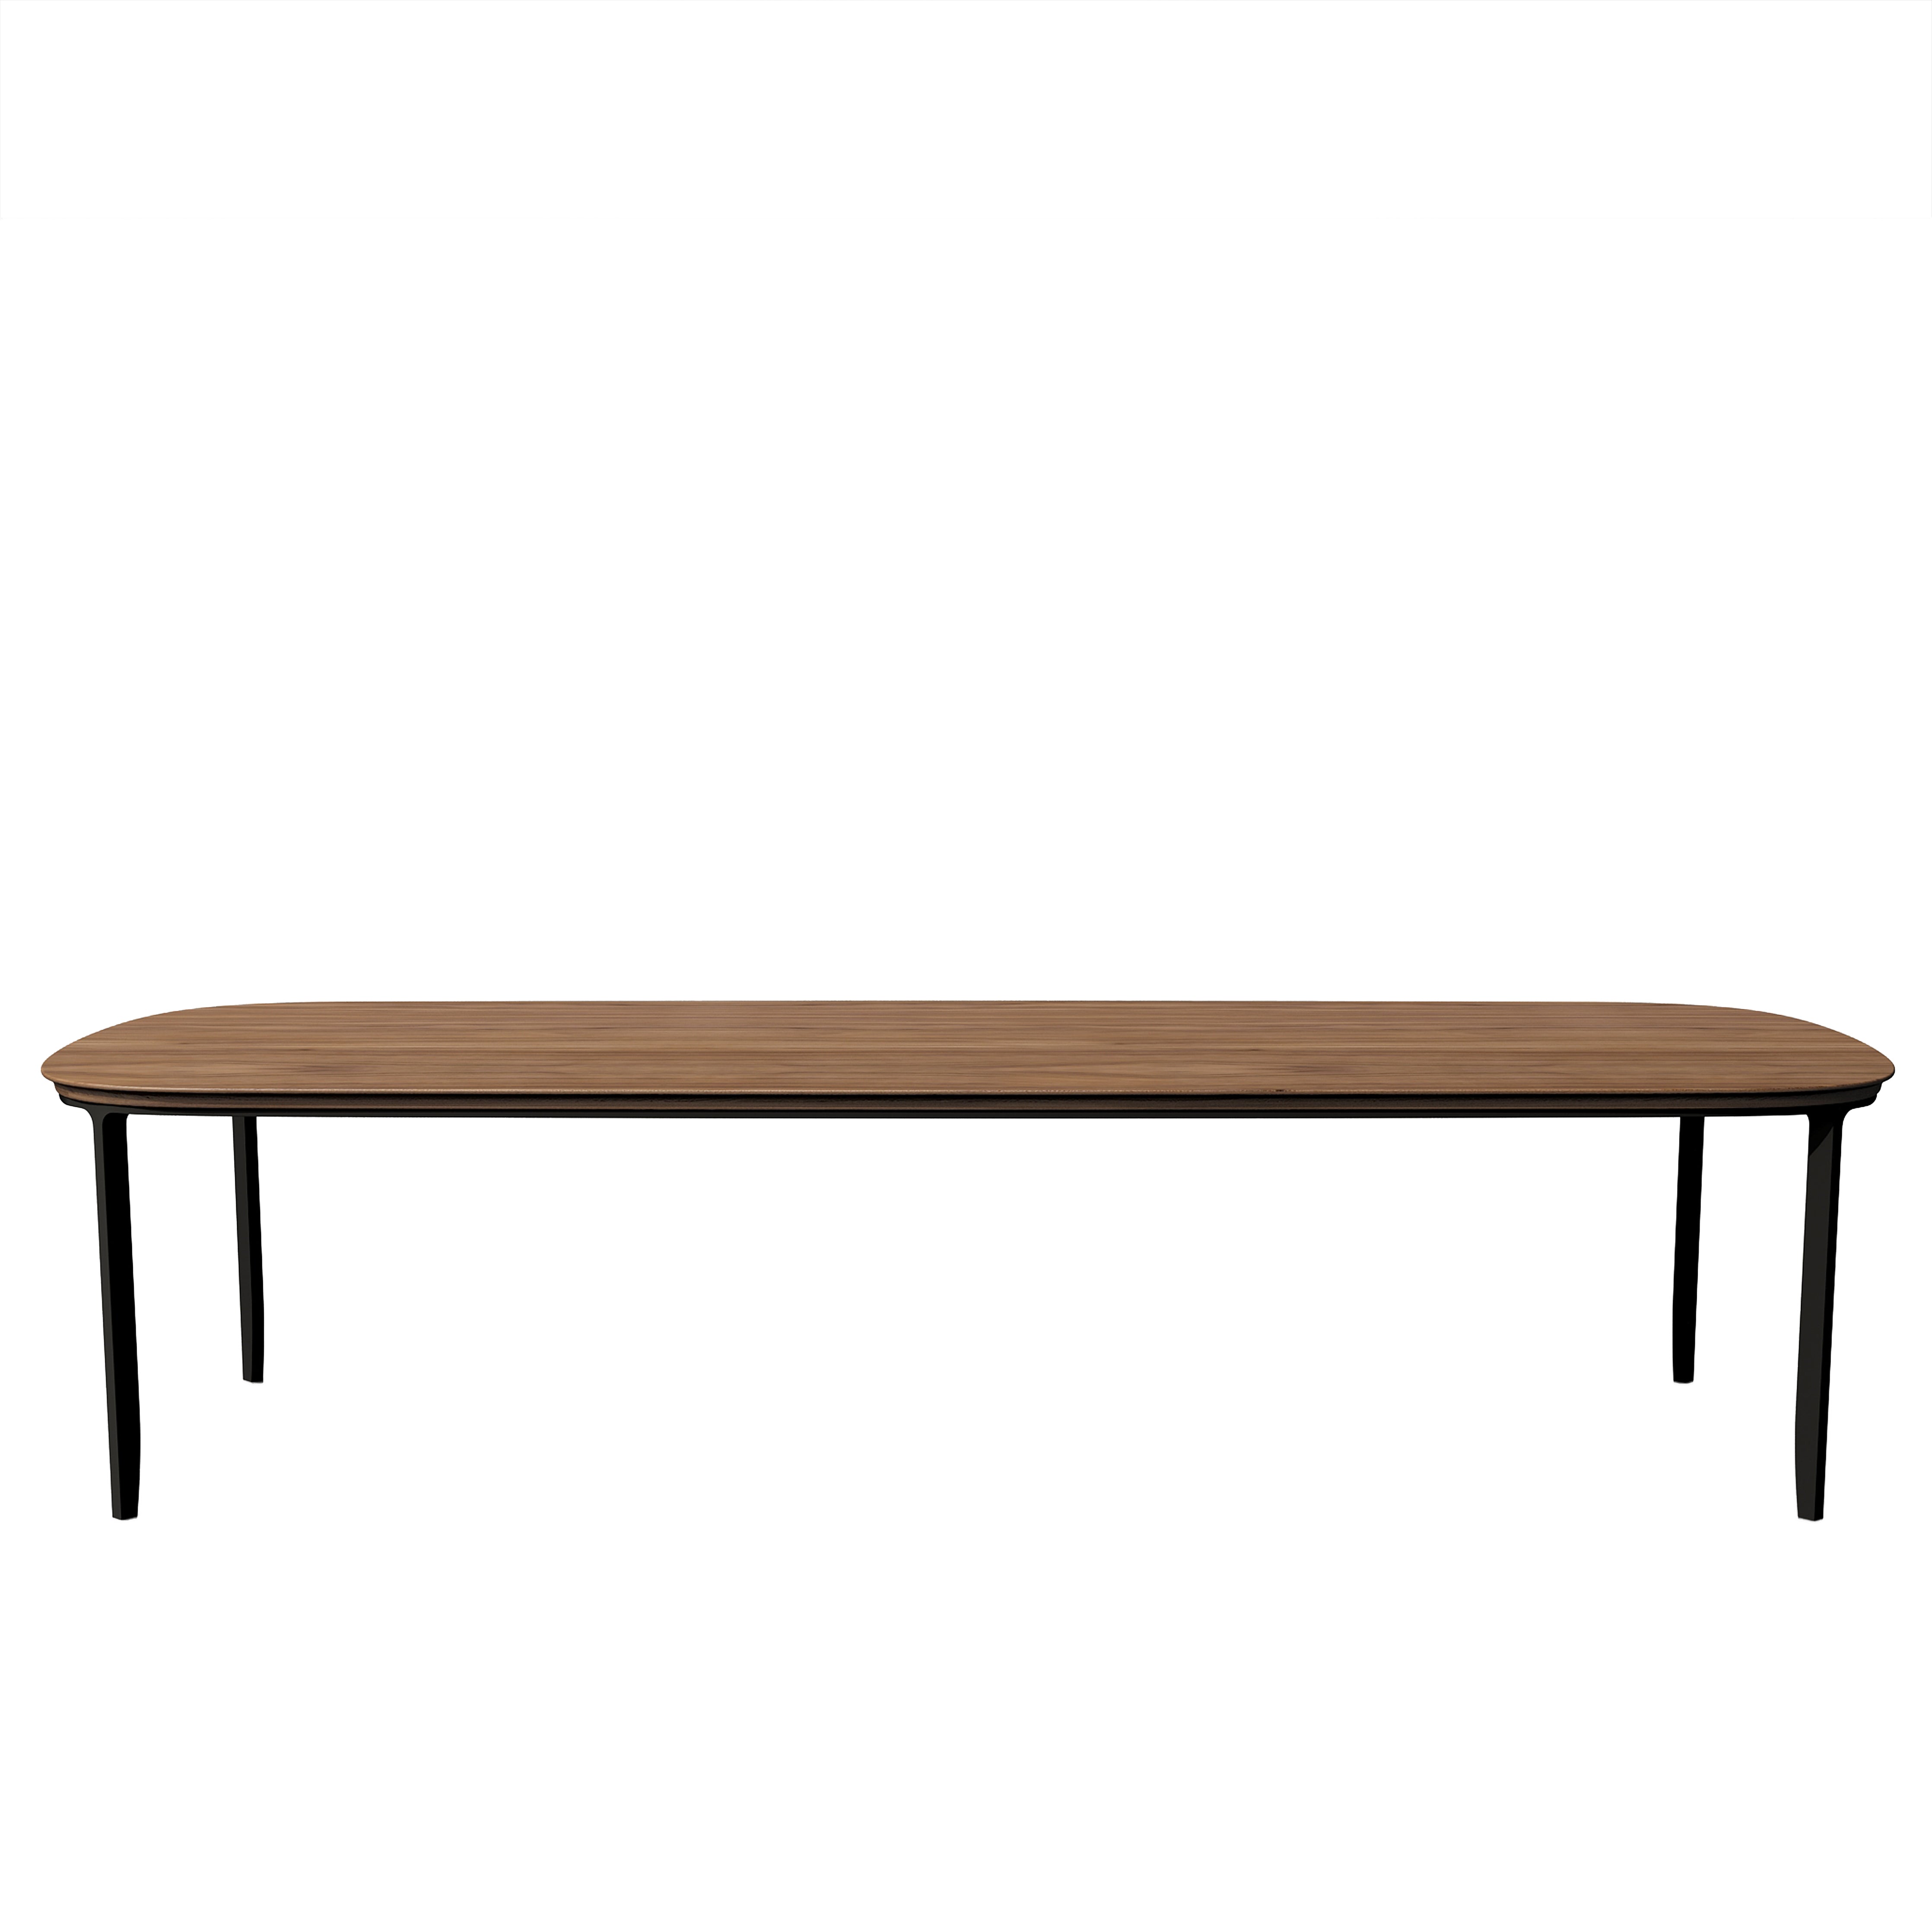 Trail - Dining Table I